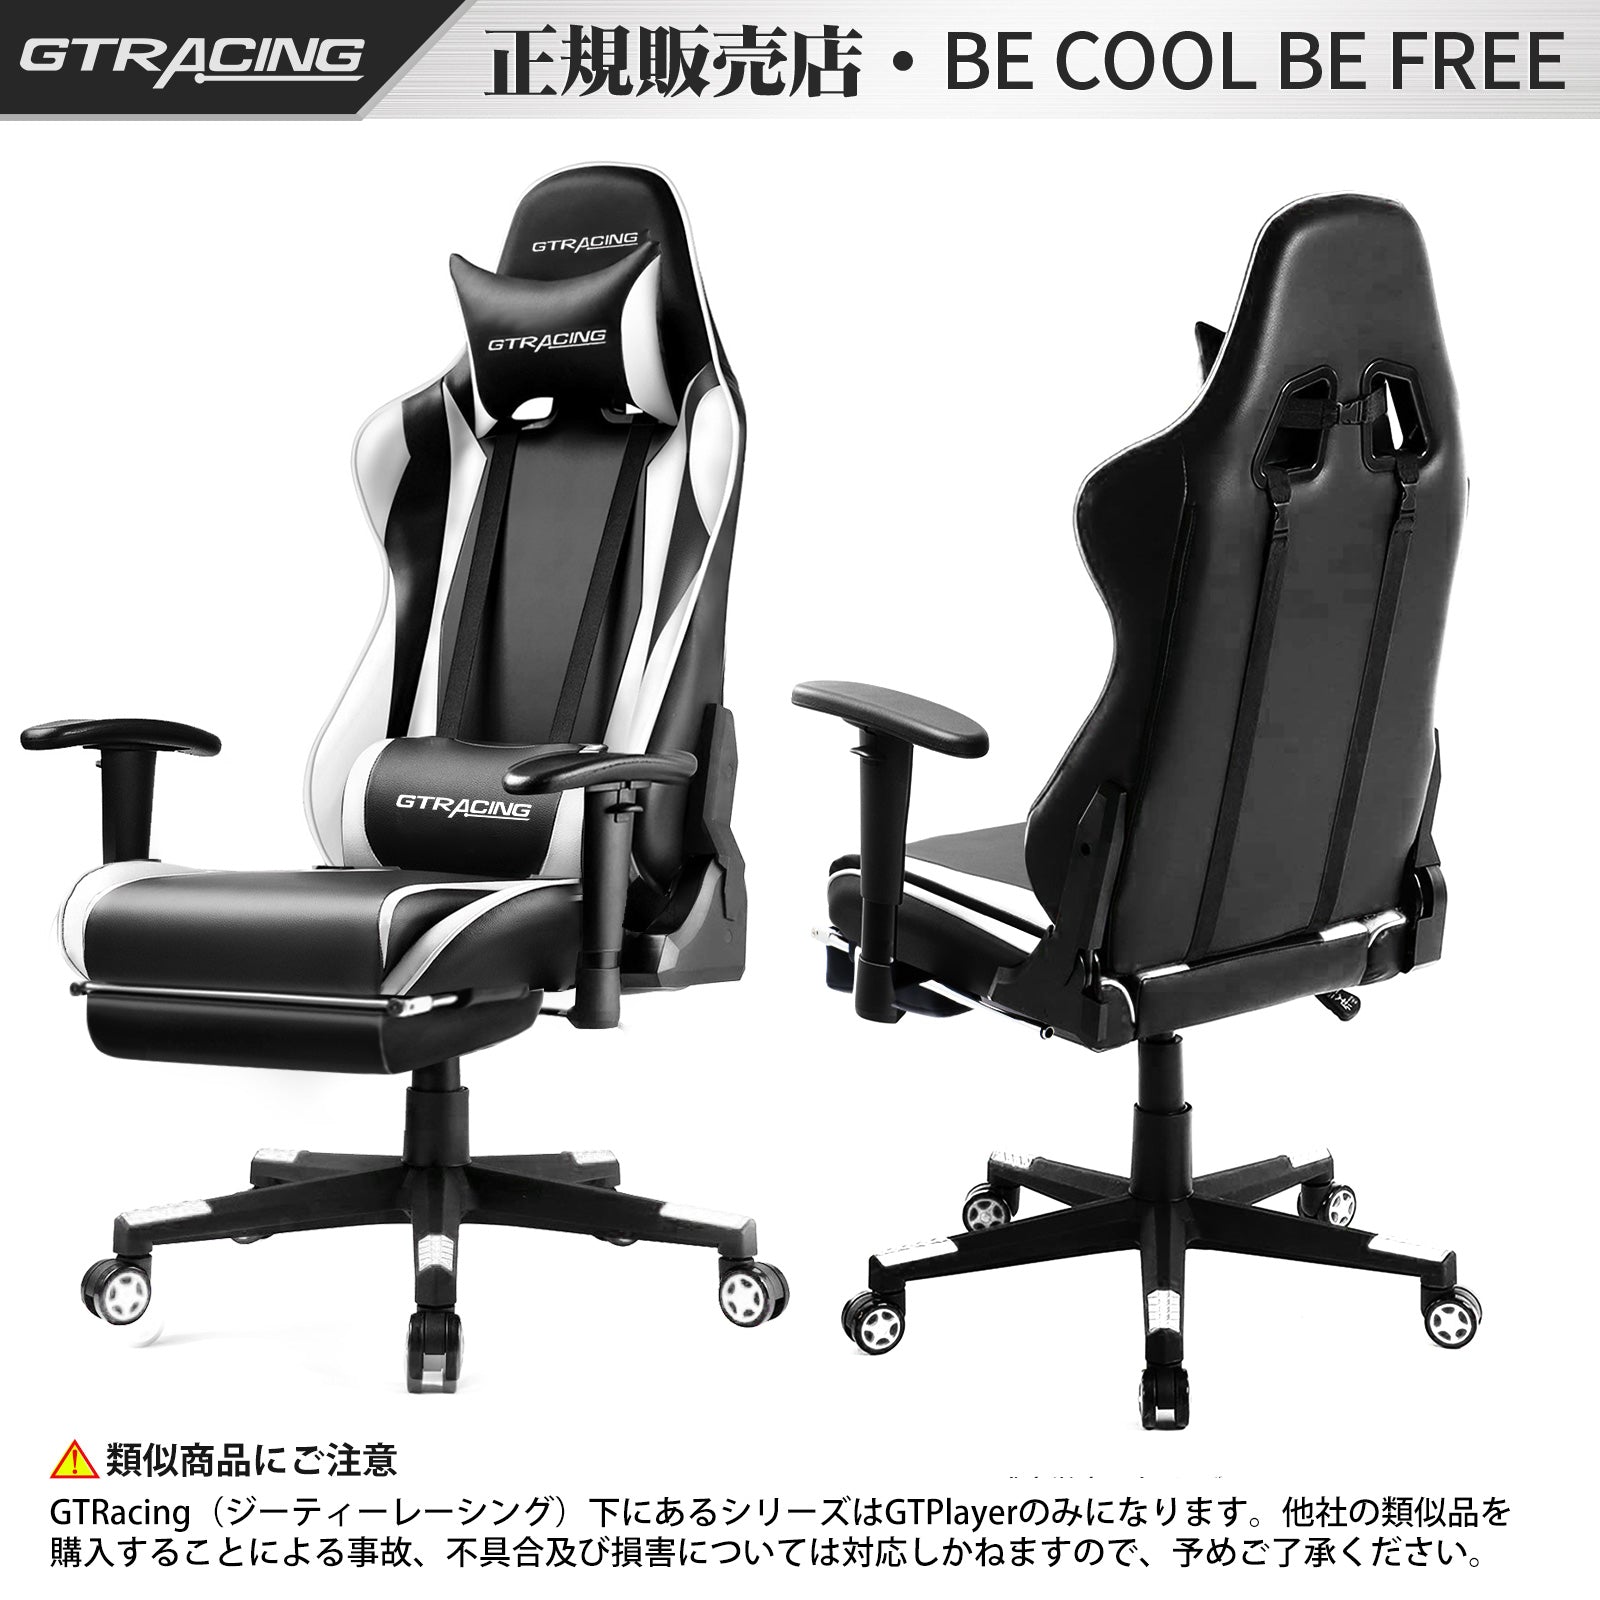 GT002F Reclining Gaming Chair | GTRACING